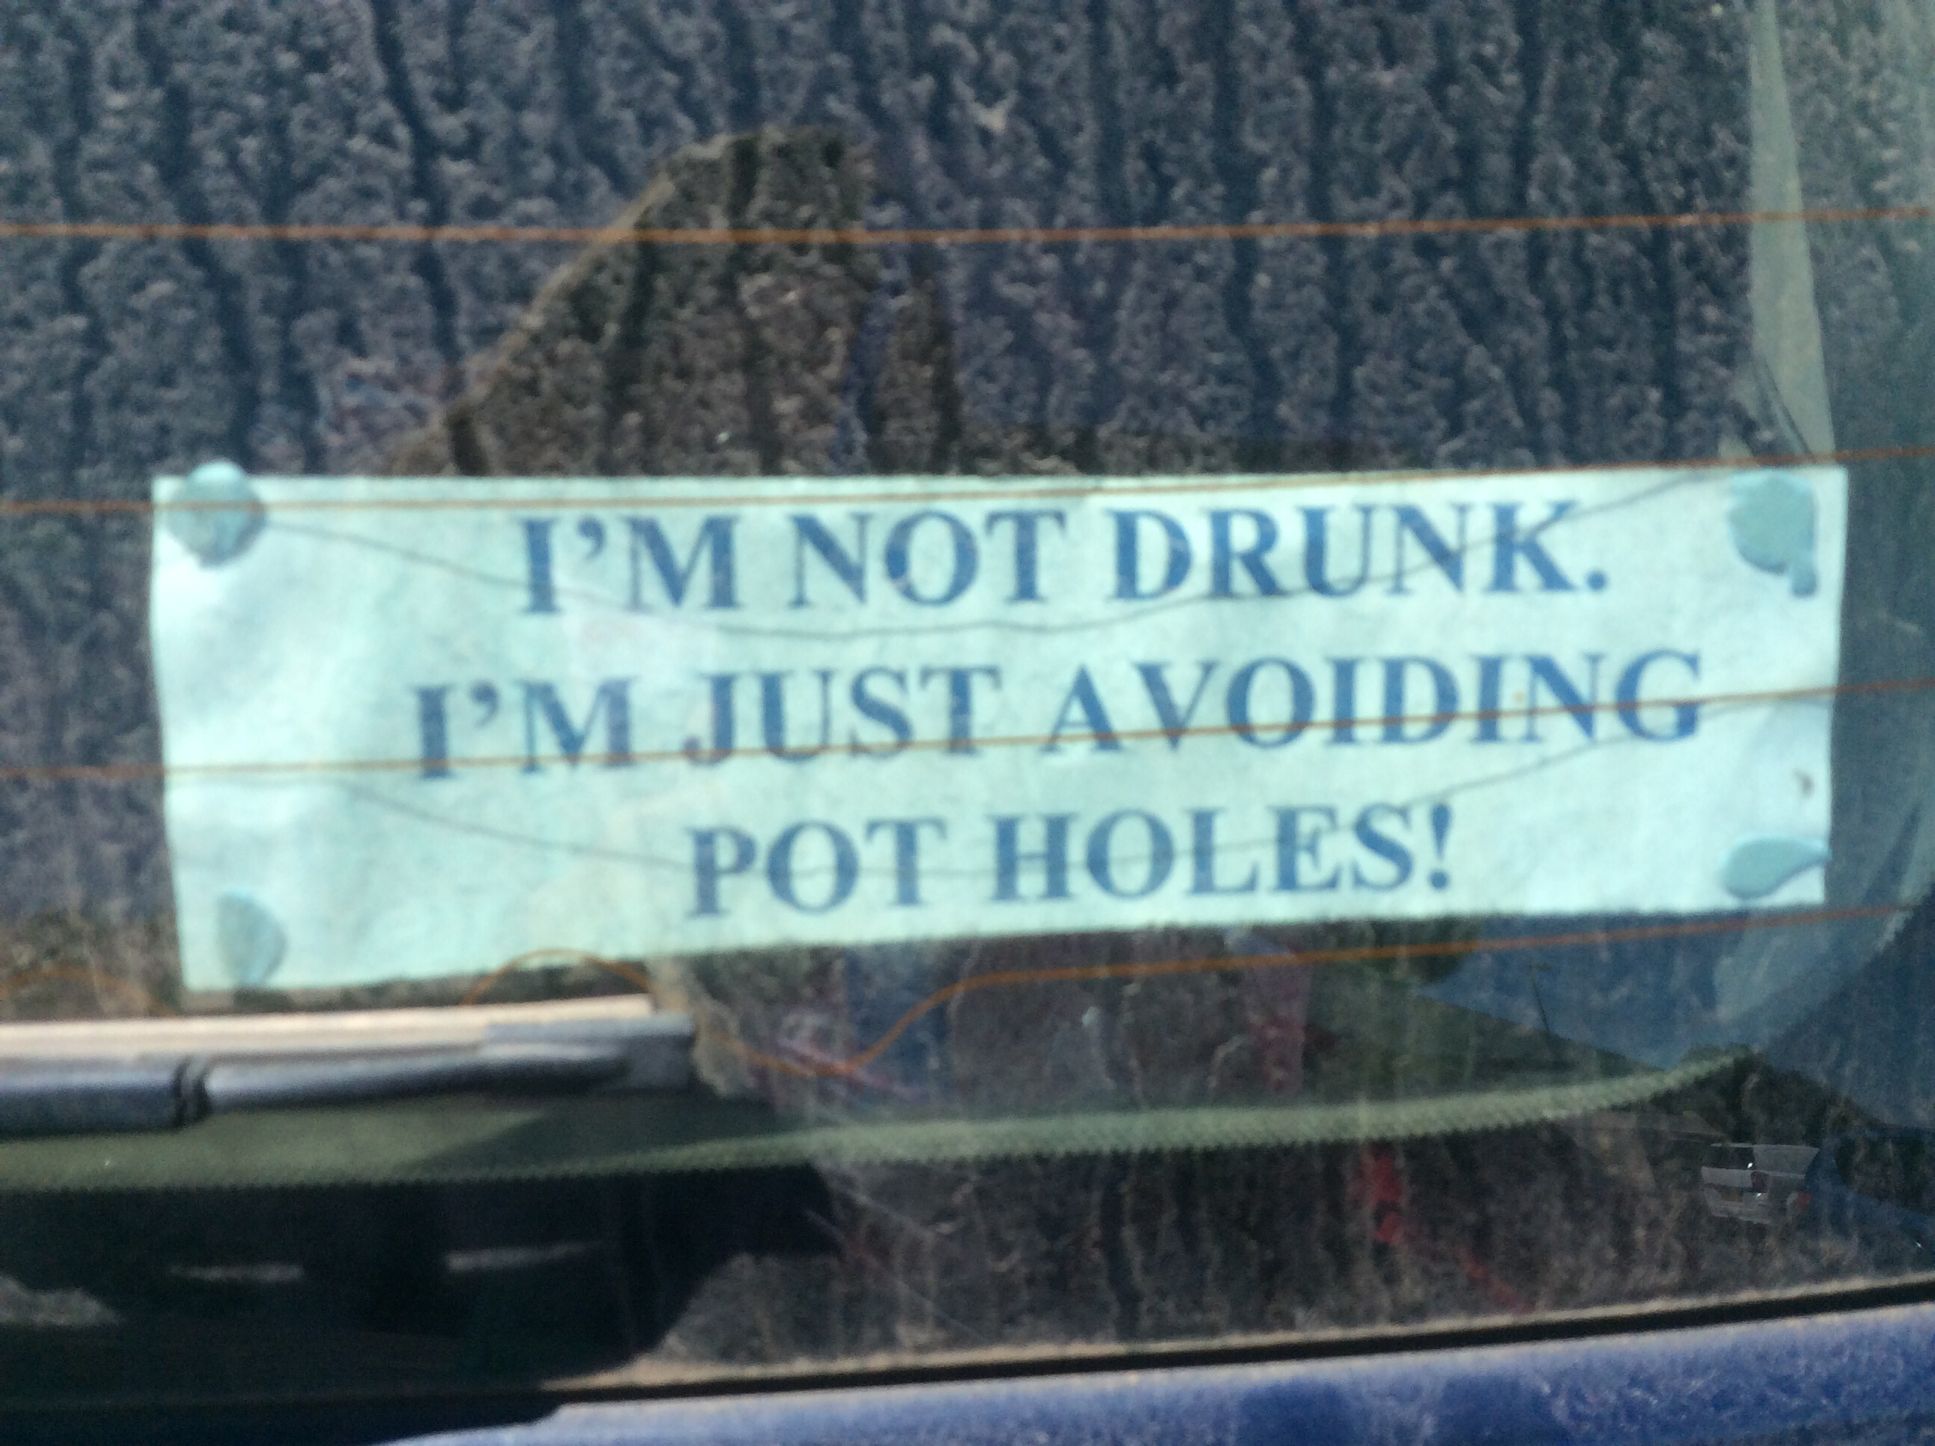 I saw this on a car the other day - meme